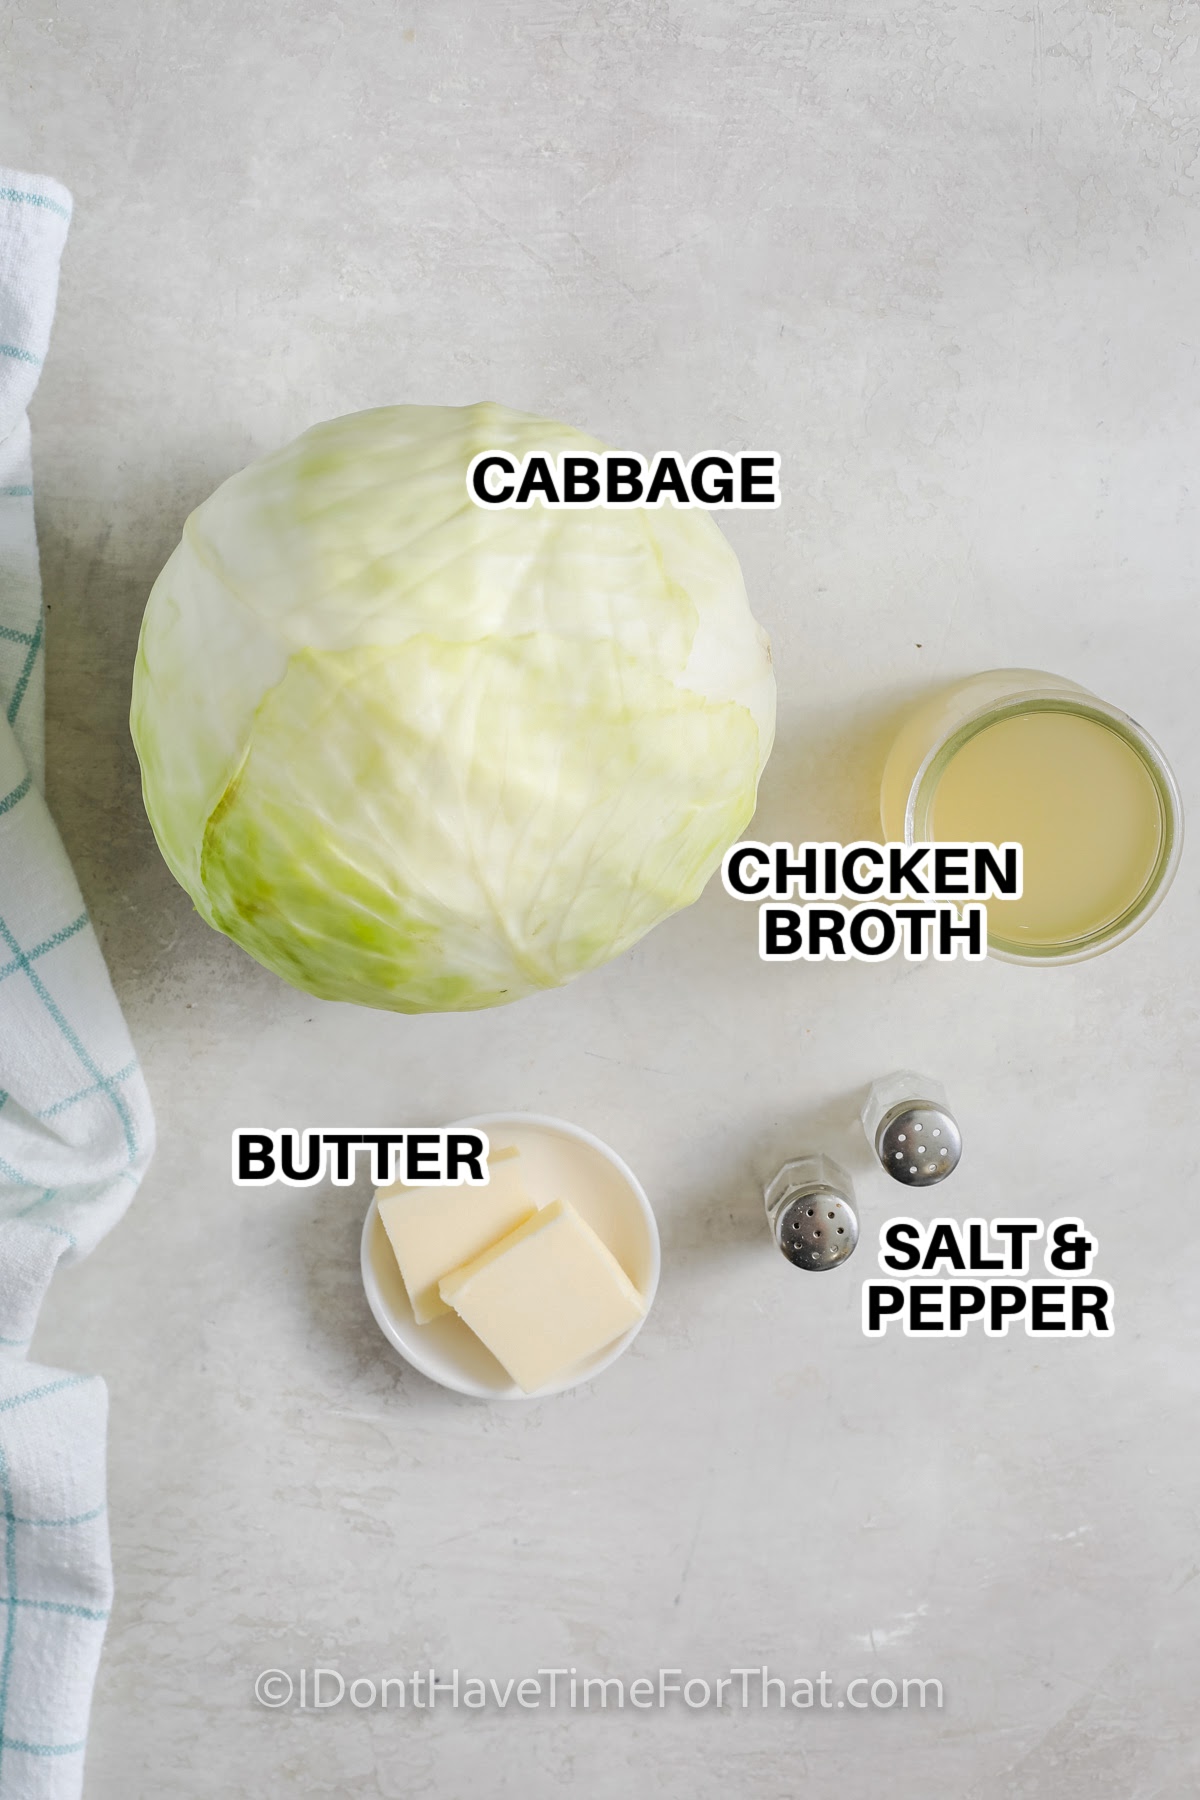 Ingredients to make instant pot cabbage labeled: cabbage, chicken broth, butter, salt, and pepper